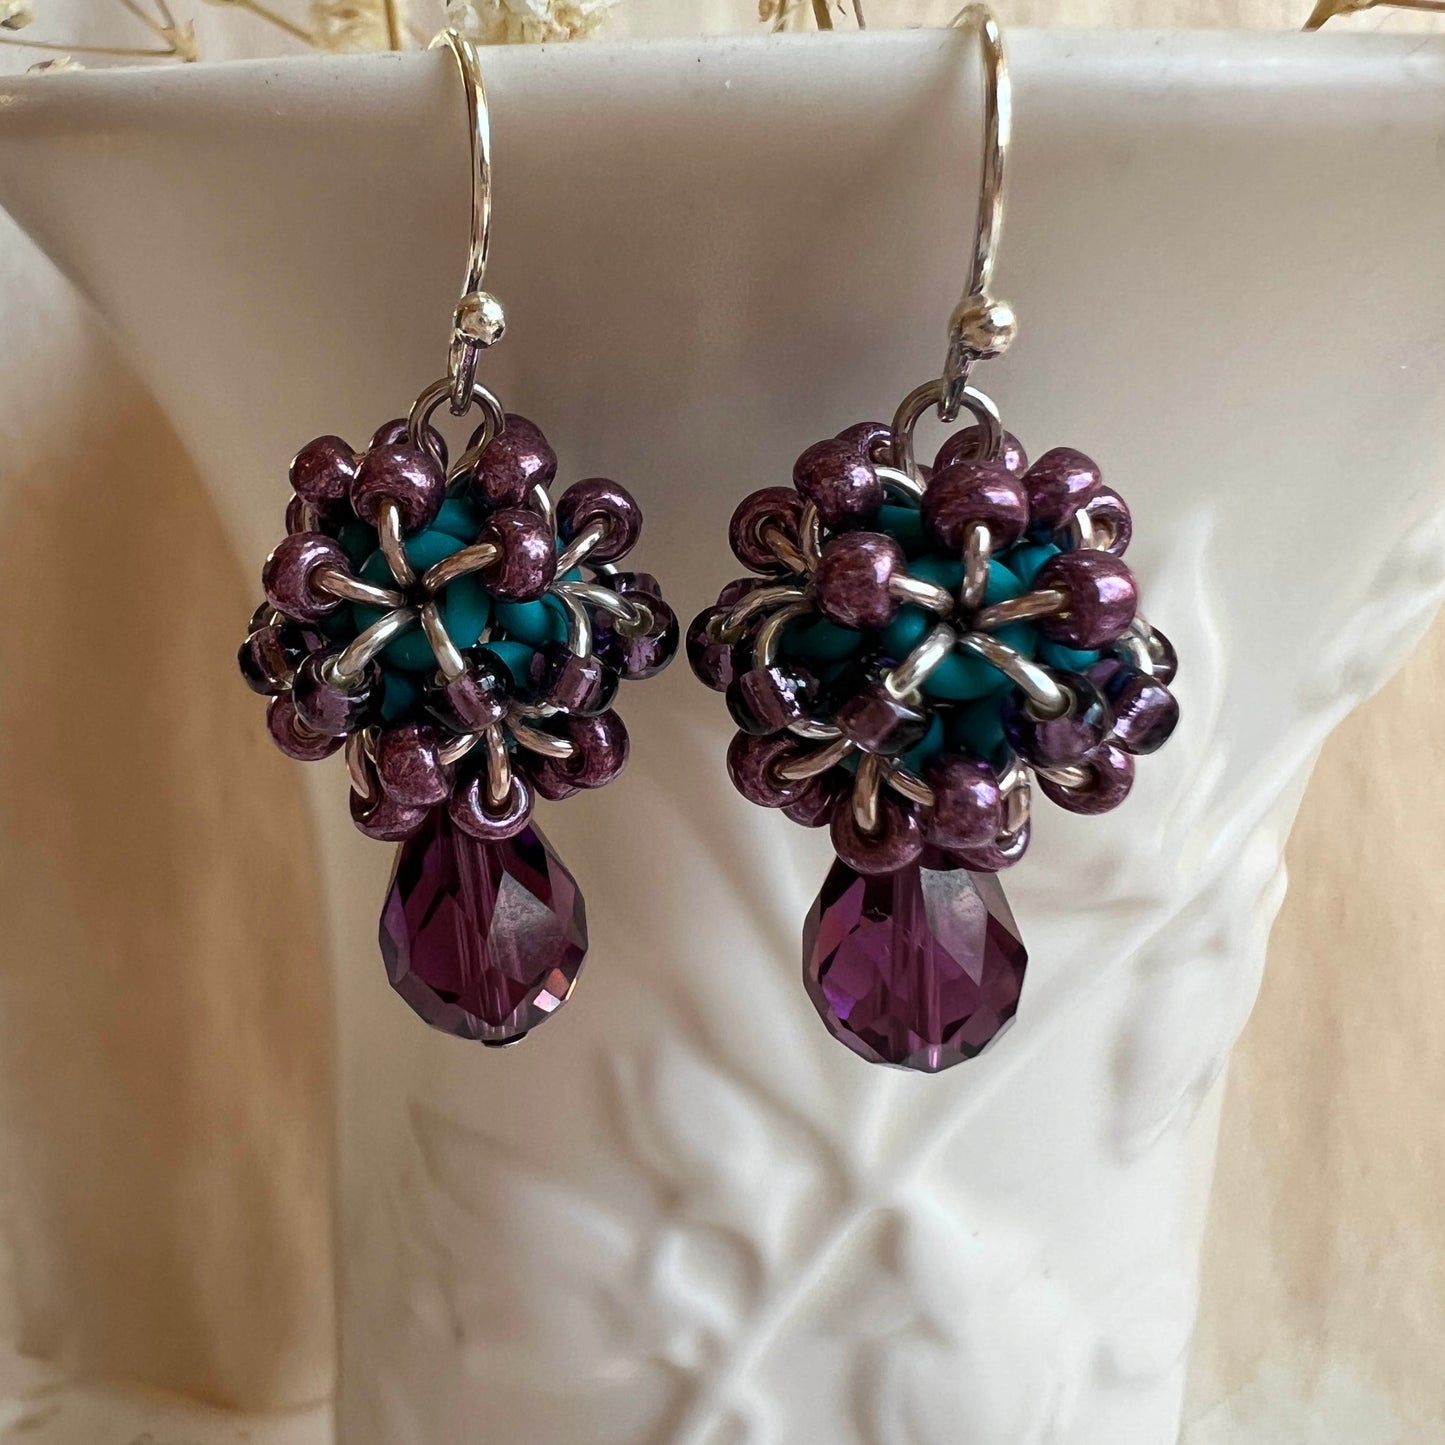 Faceted Beaded Ball Earrings Kit with Video Class - Teal, Amethyst, Silver & Rose Gold